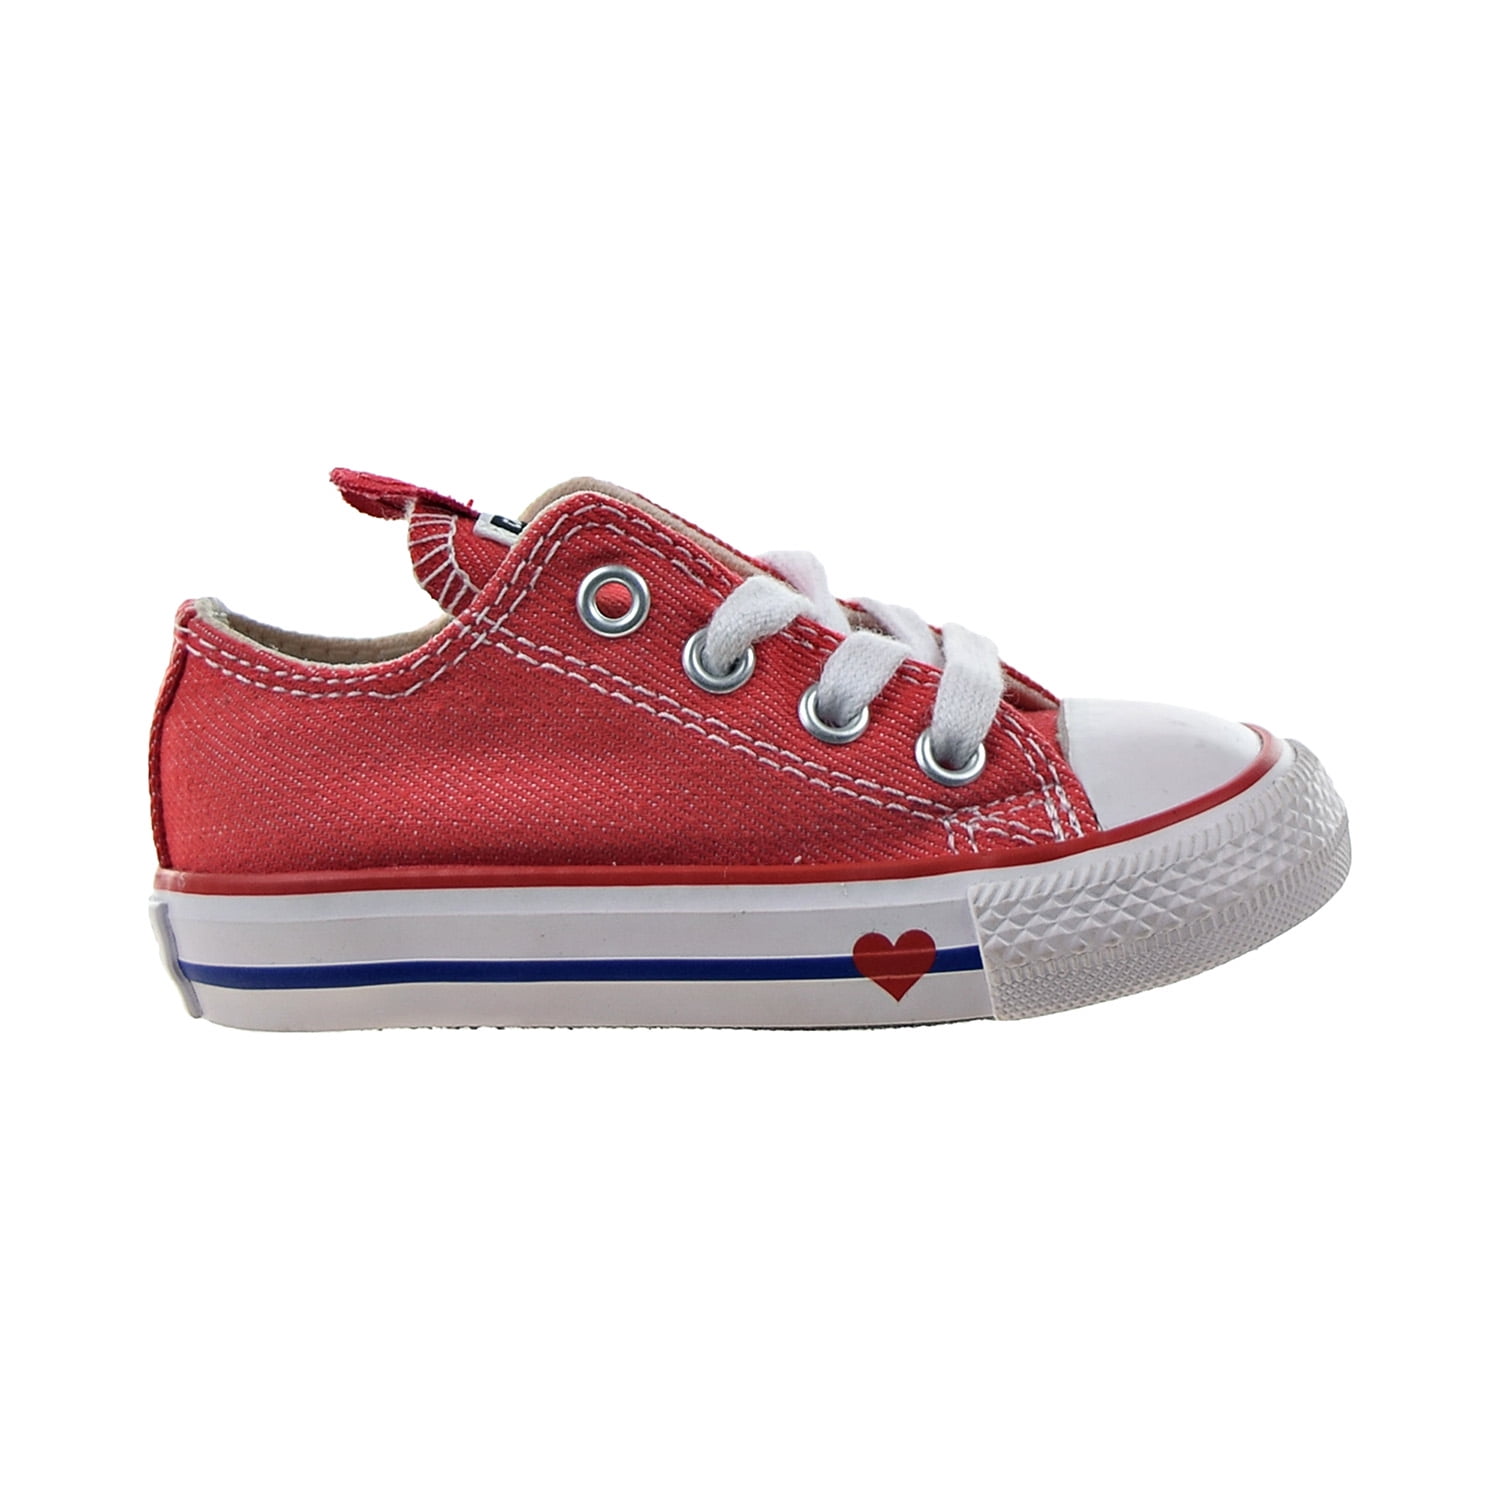 Converse Chuck Taylor All Star Ox Denim Love Toddlers' Shoes Sedona Red-Blue  763568f 